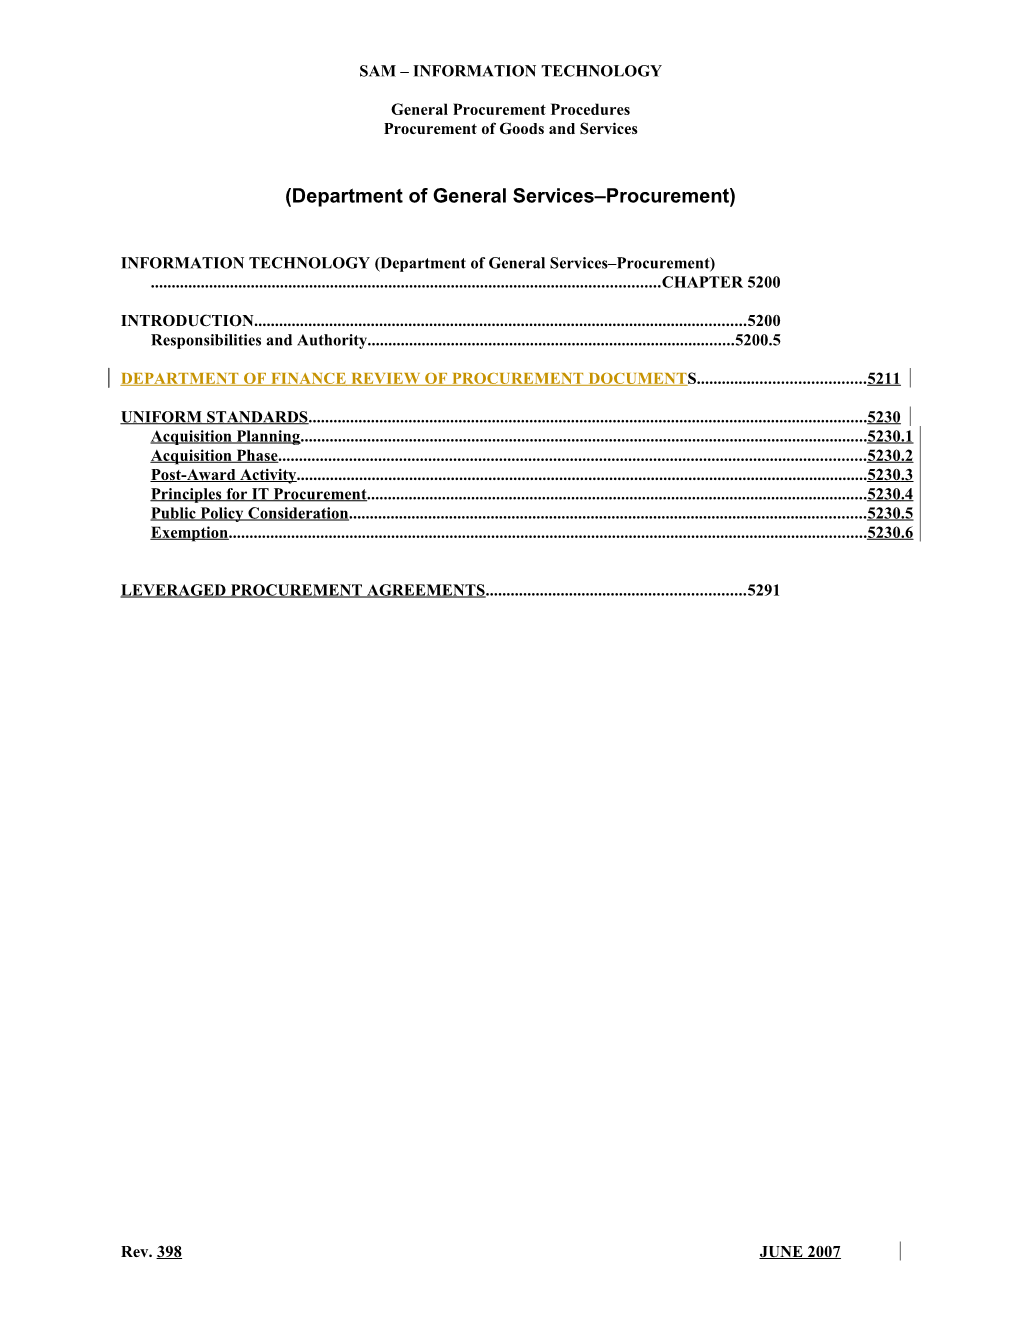 5211 Department of Finance Review of Procurement Documents